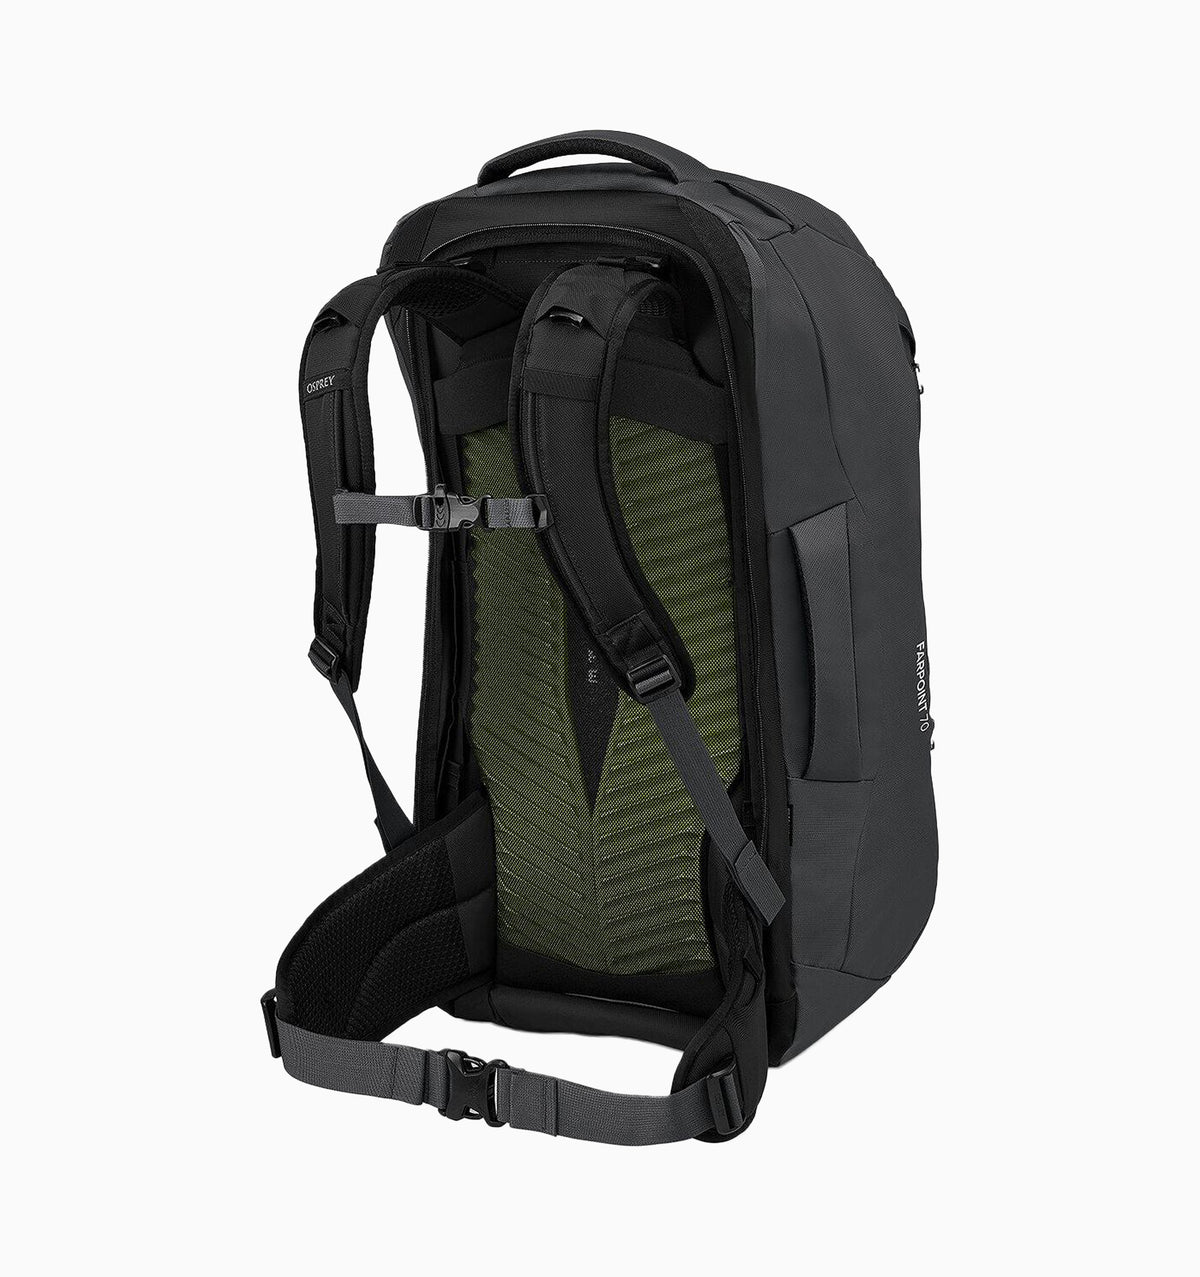 Osprey 16 Farpoint Travel Pack 70L - Tunnel Vision Grey